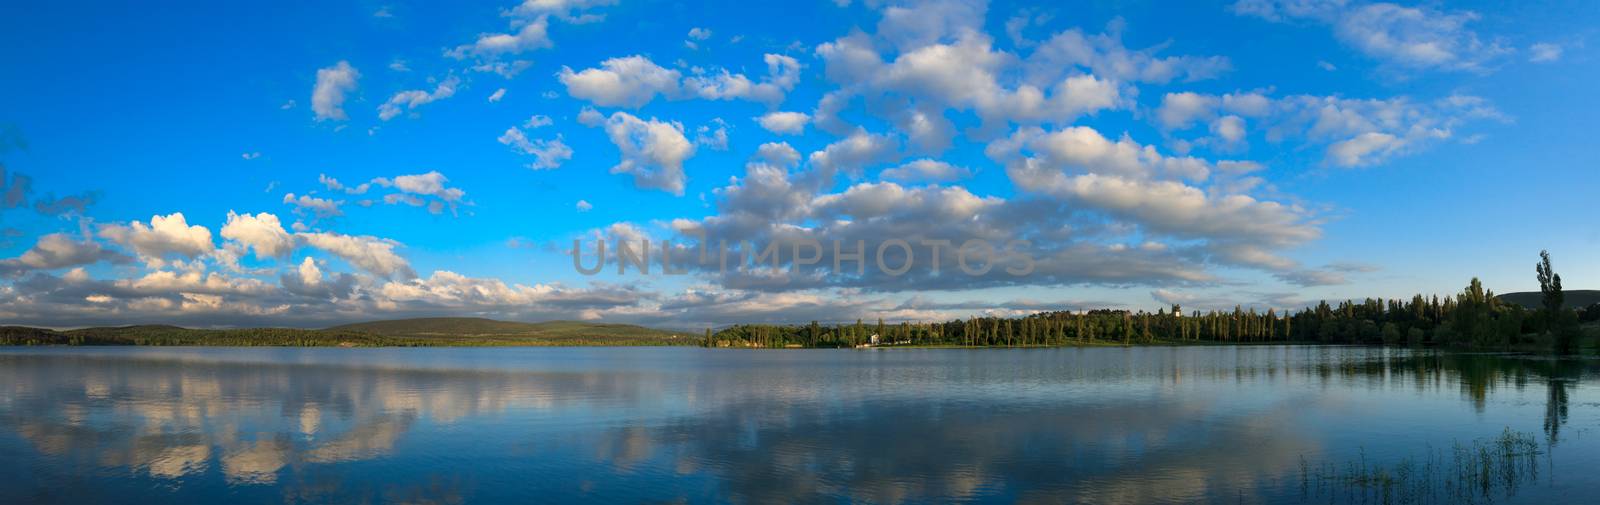 Blue sky with sun over water. by fogen